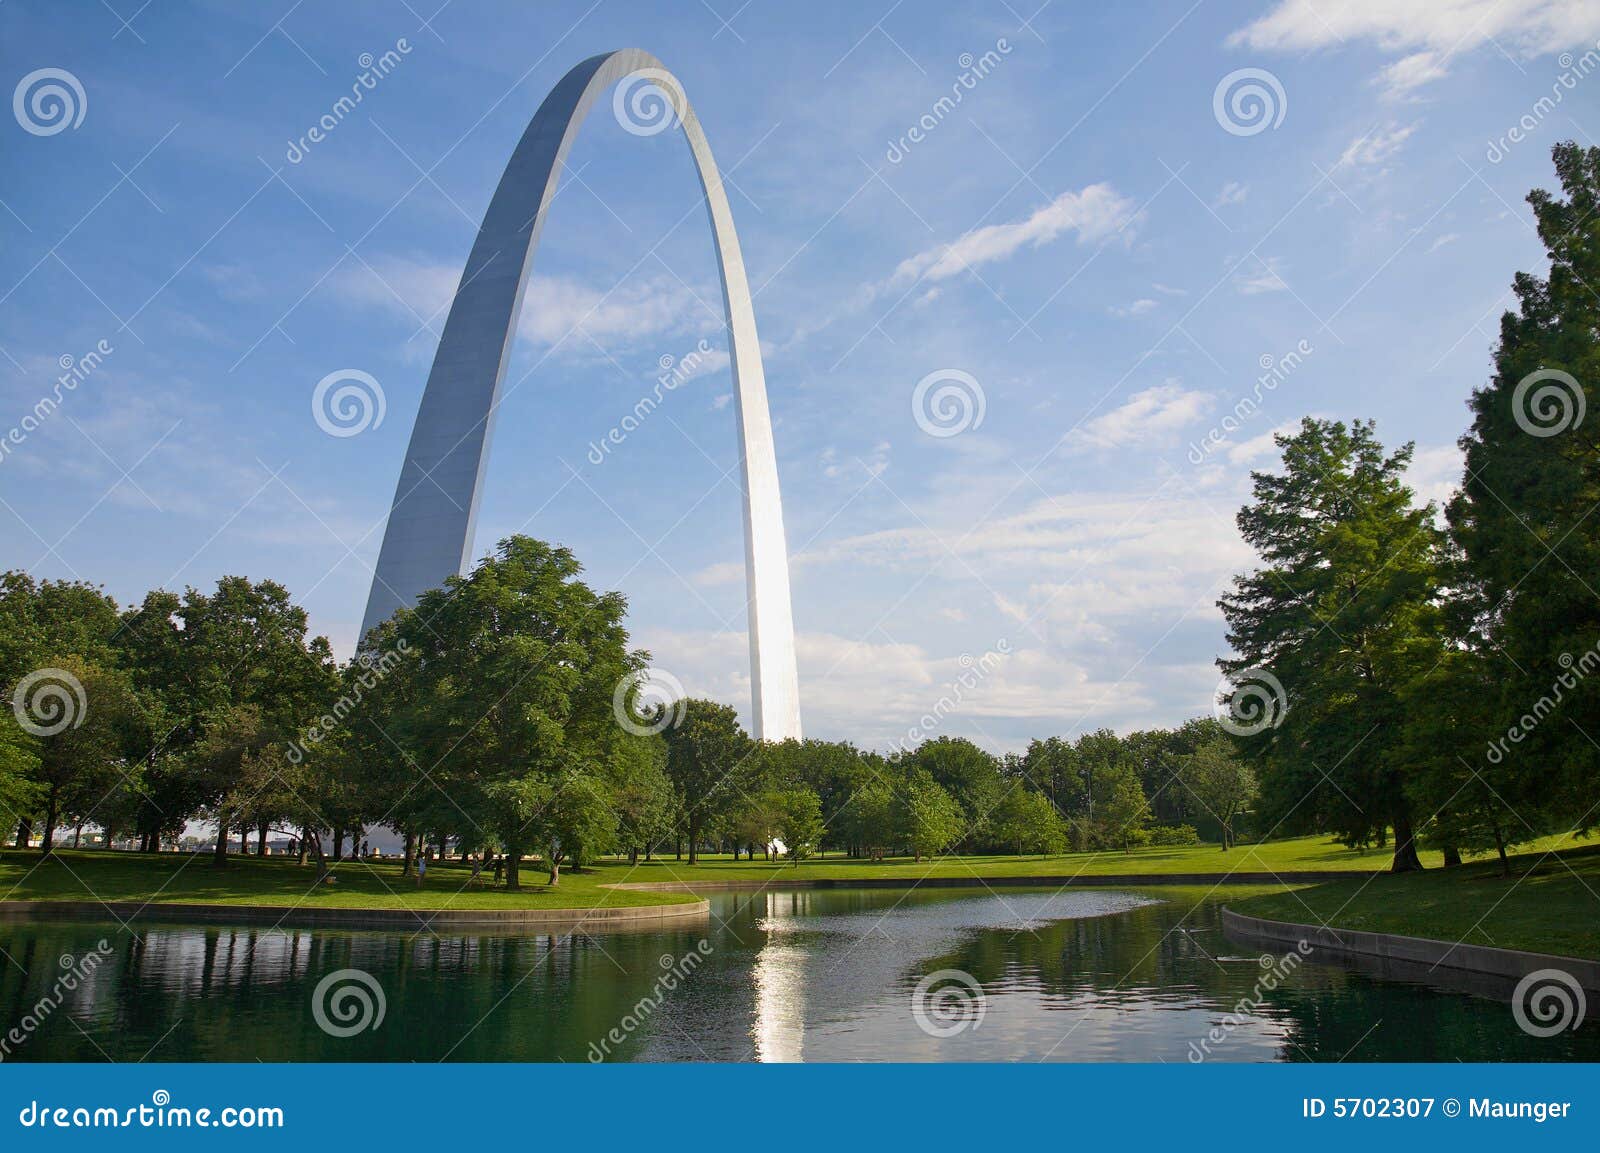 st. louis arch and reflection